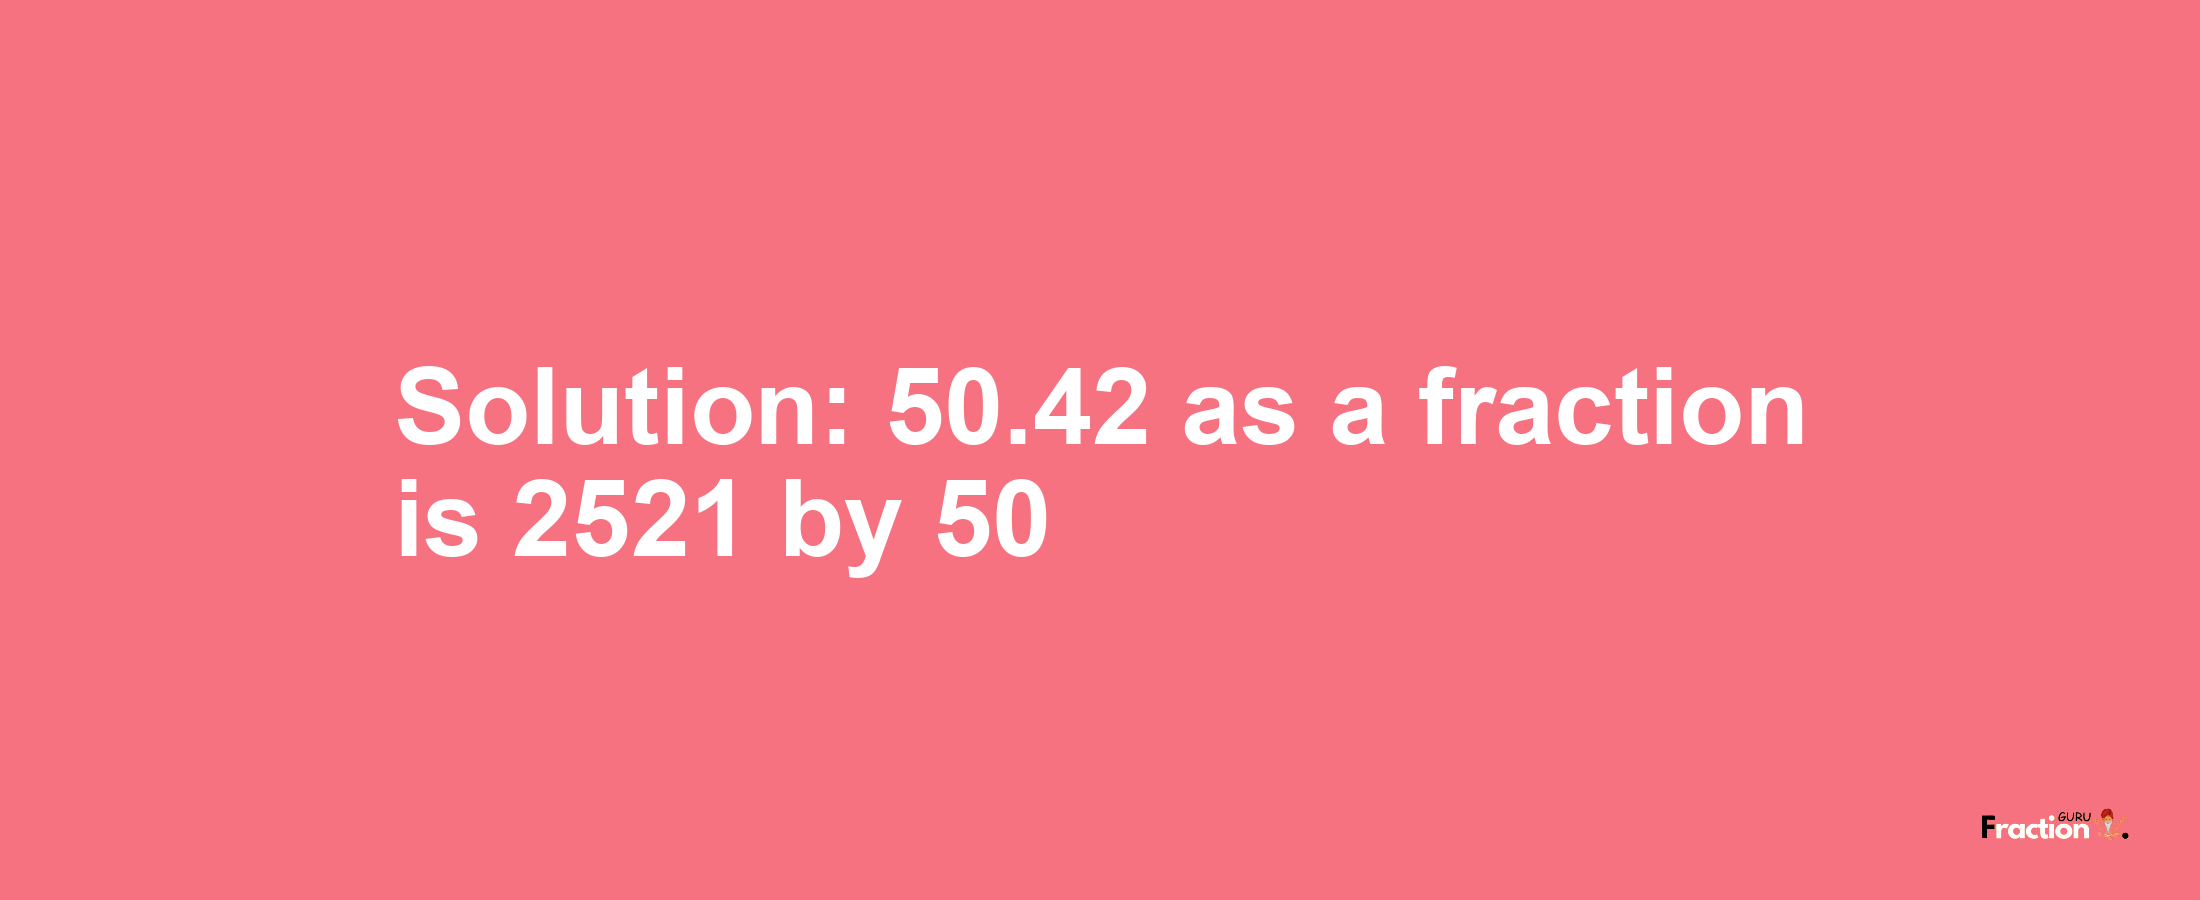 Solution:50.42 as a fraction is 2521/50